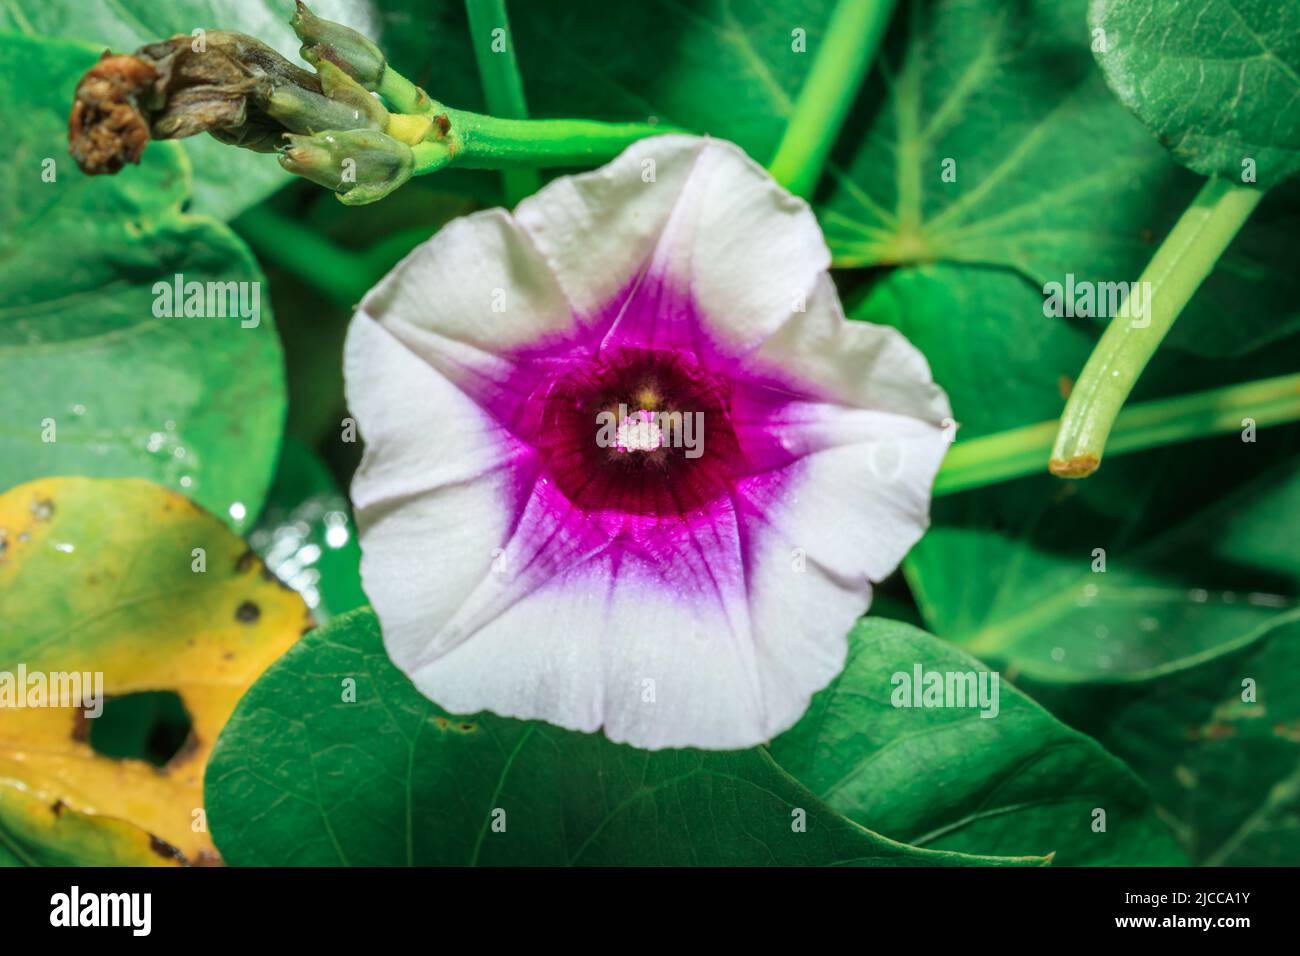 Sweet potato flower (Ipomoea batatas) growing in an agricultural field, Uganda, Africa Stock Photo